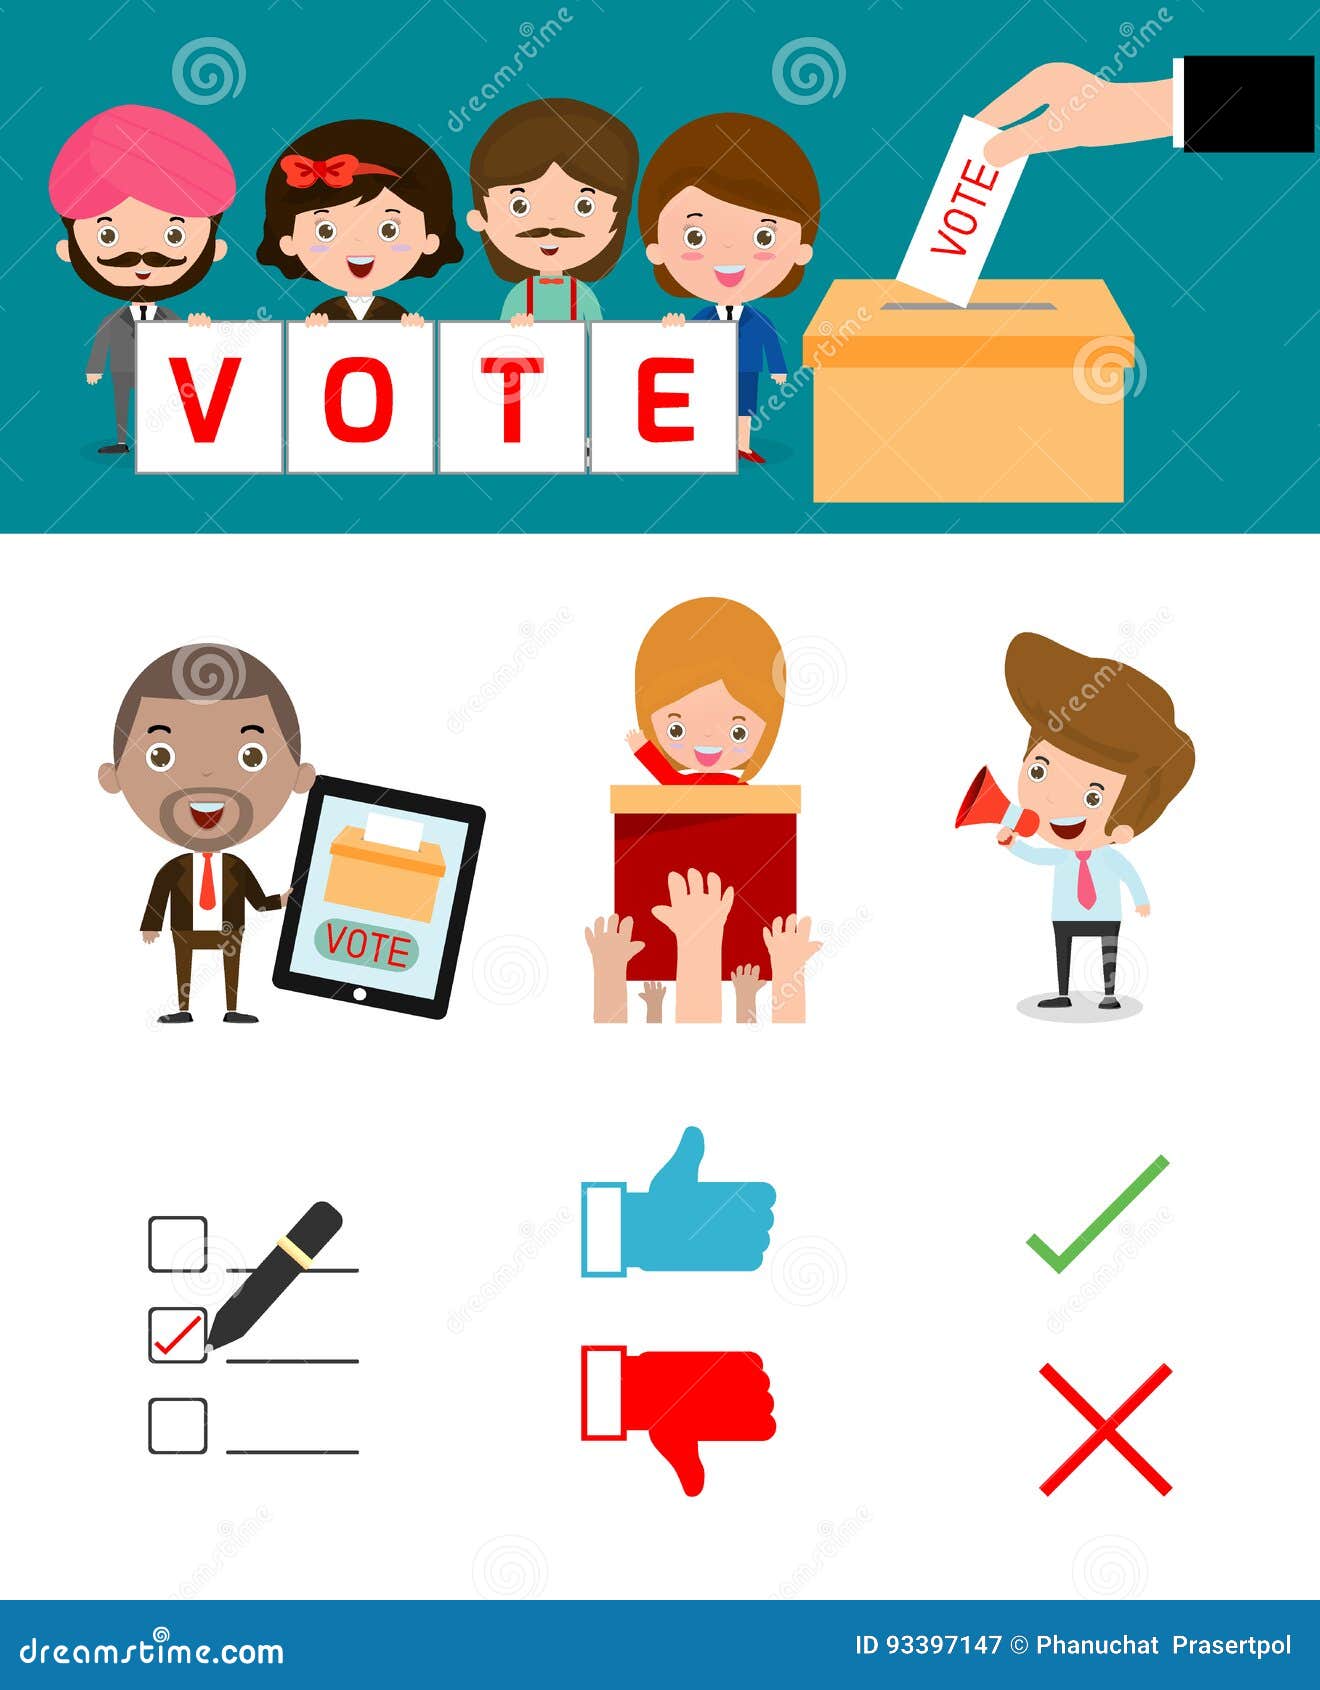 elections with voting debates, hand casting a vote,voting concept in flat style